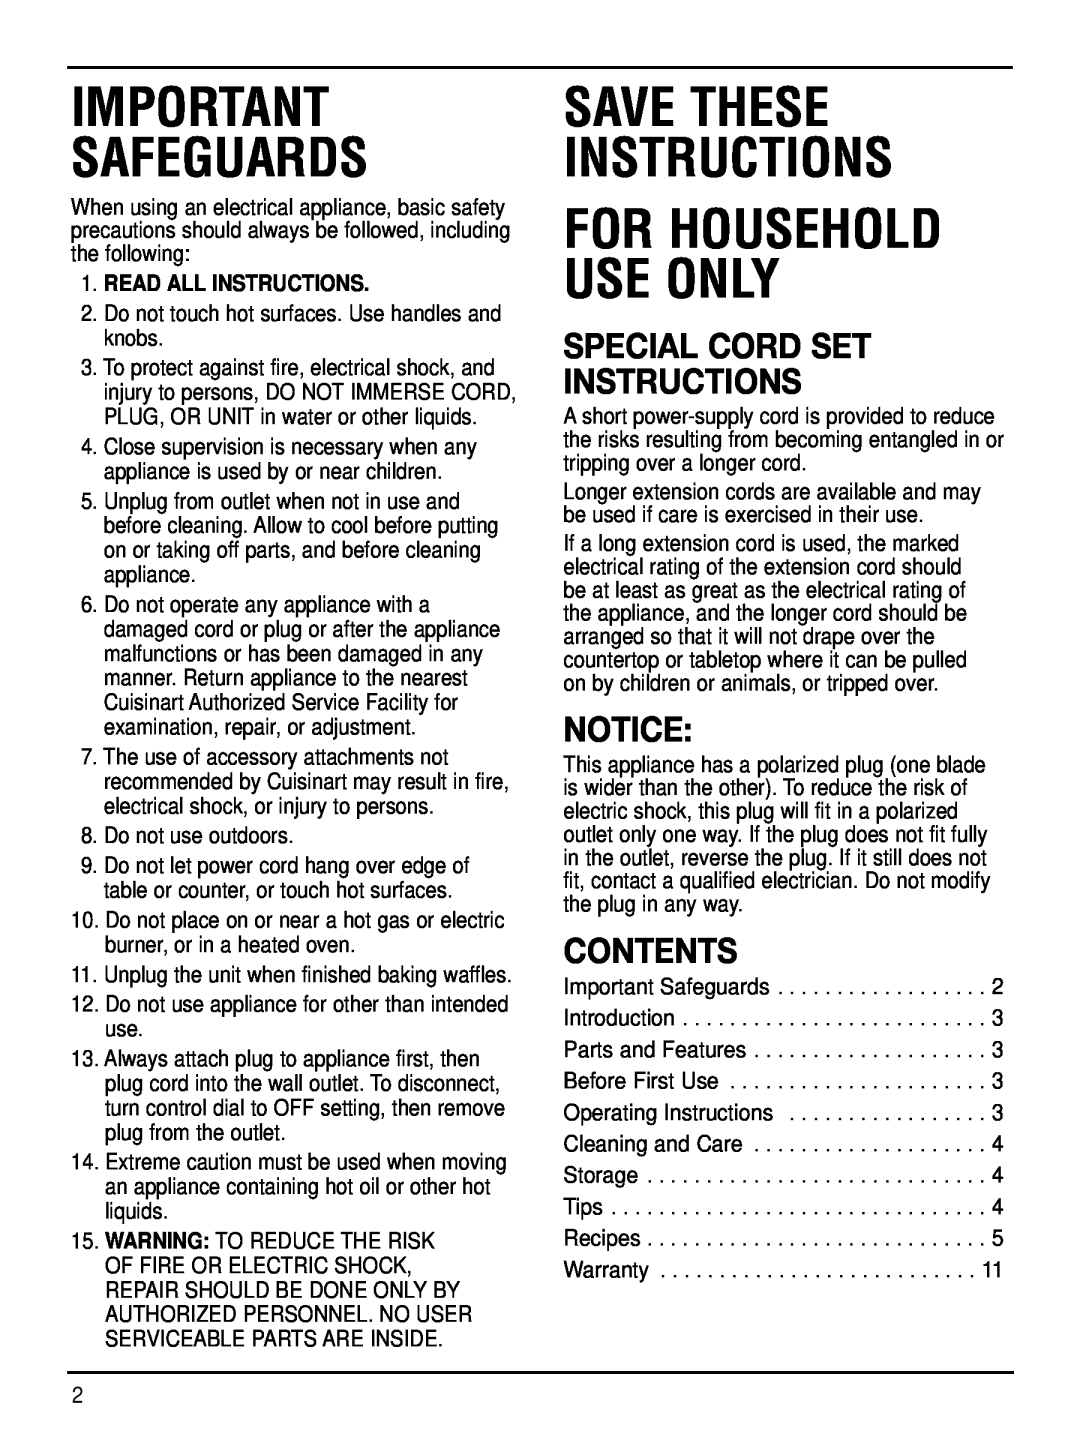 Cuisinart WAF-2B manual Special Cord Set Instructions, Contents, Safeguards, Save These Instructions For Household Use Only 